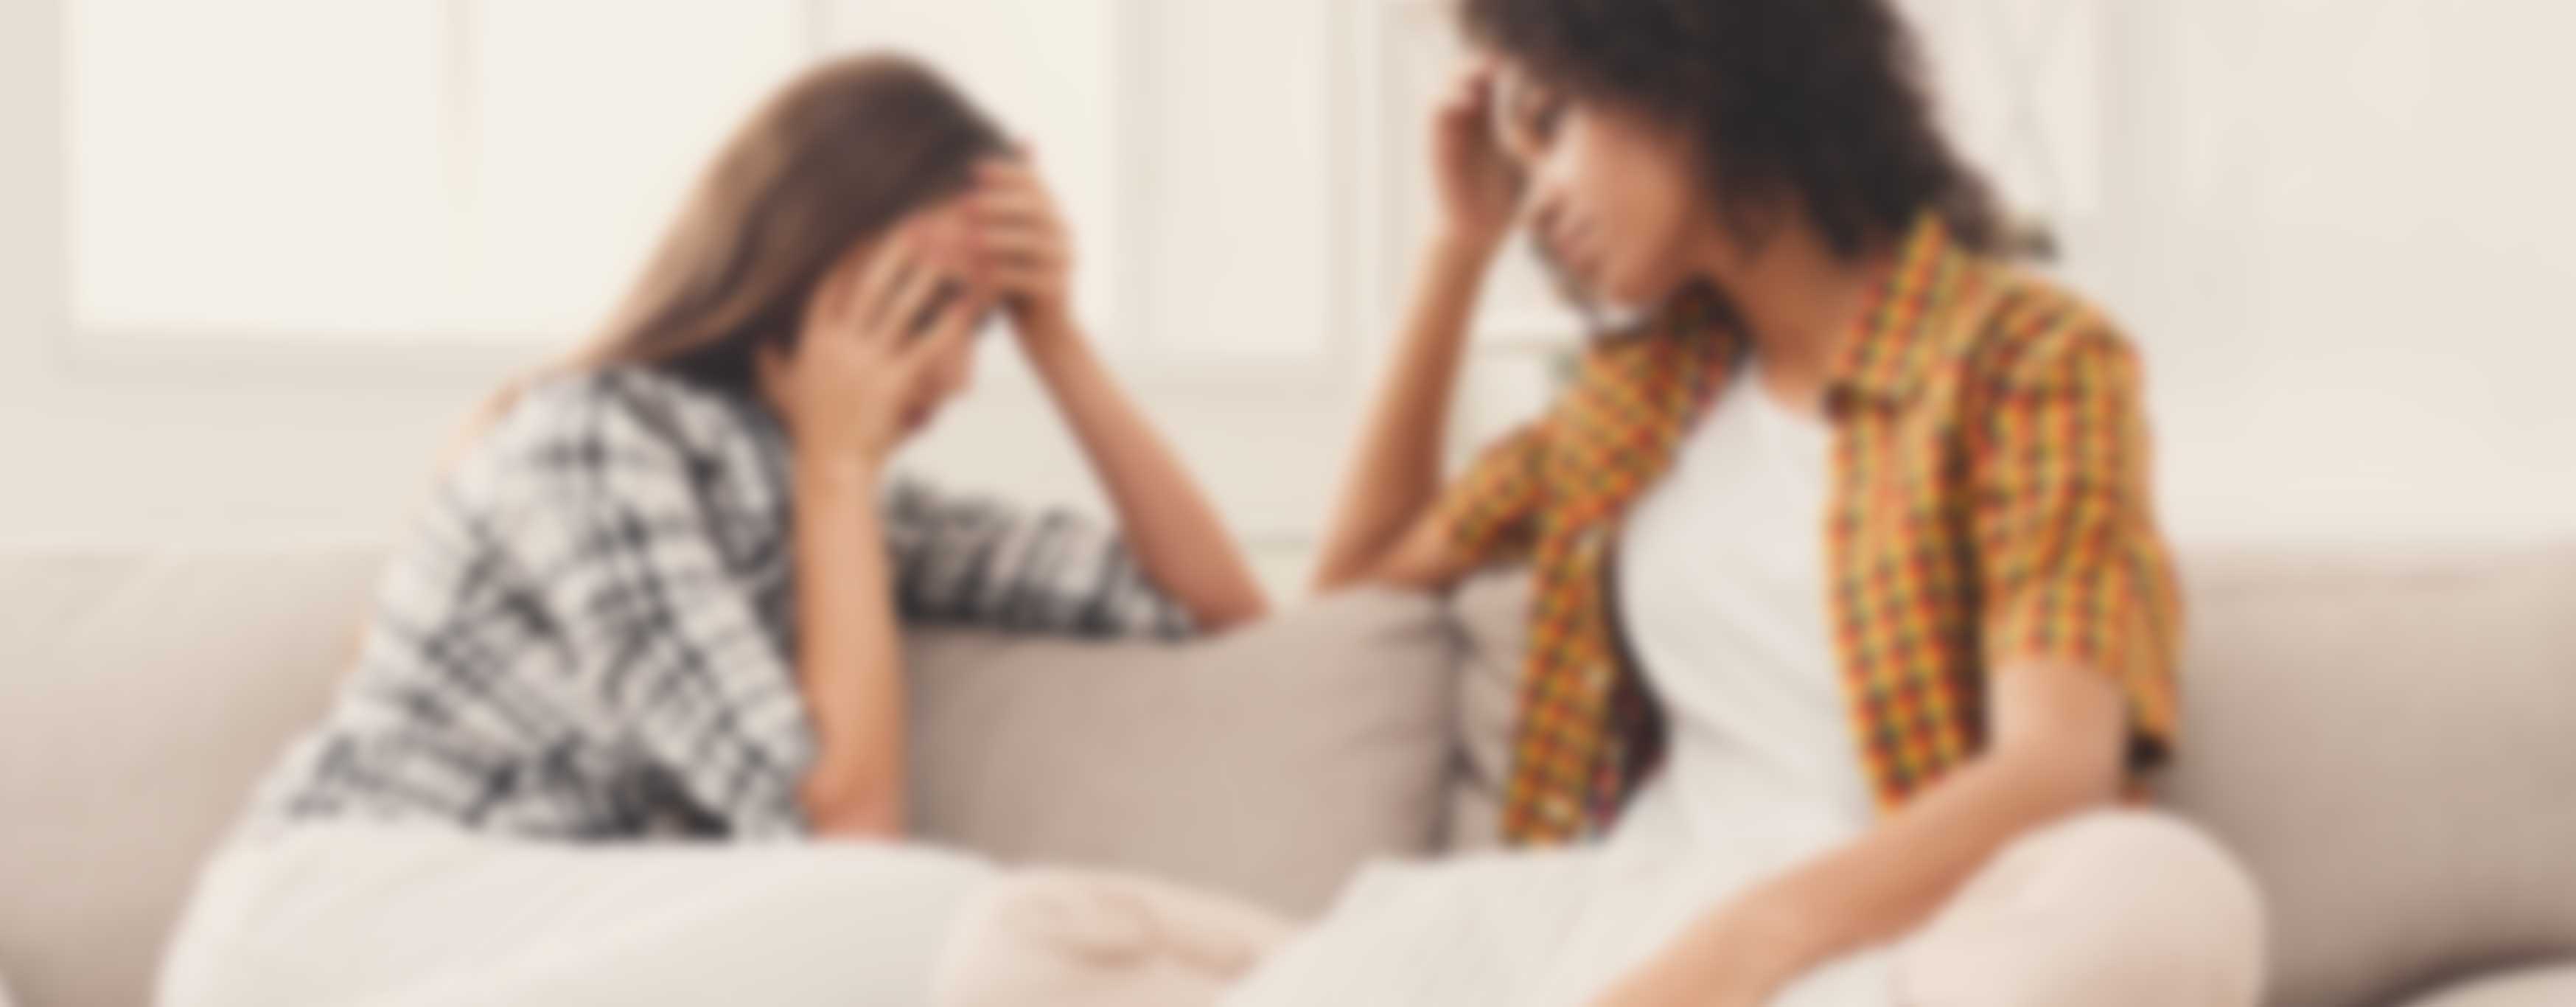 Why Lesbian And Bisexual Women Are Reluctant To Get Help For Mental